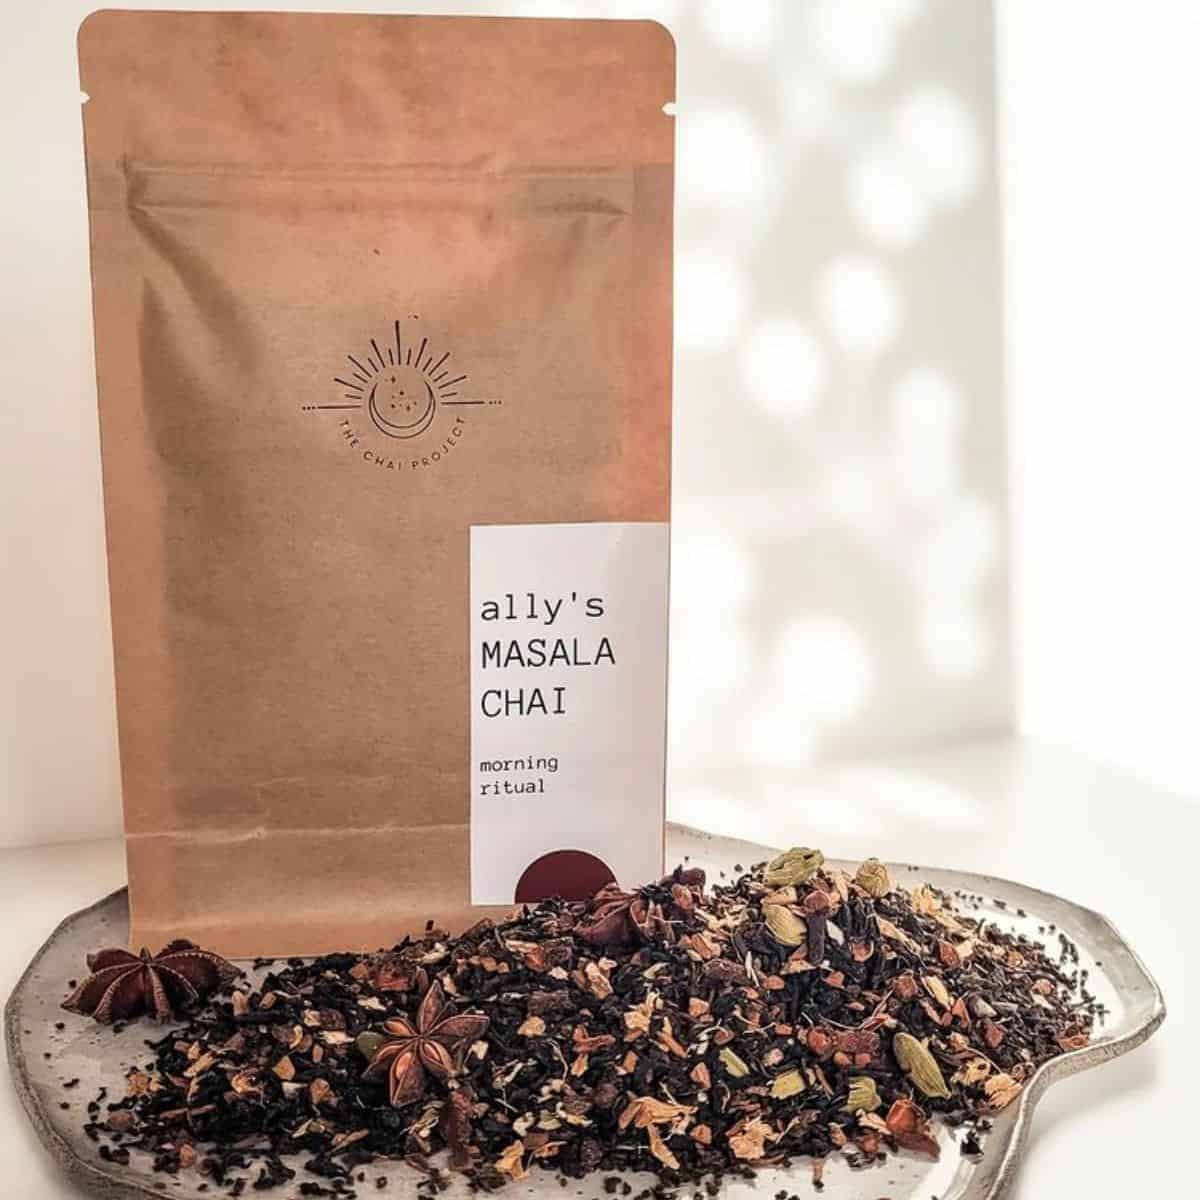 Masala Chai in brown pouch style packaging